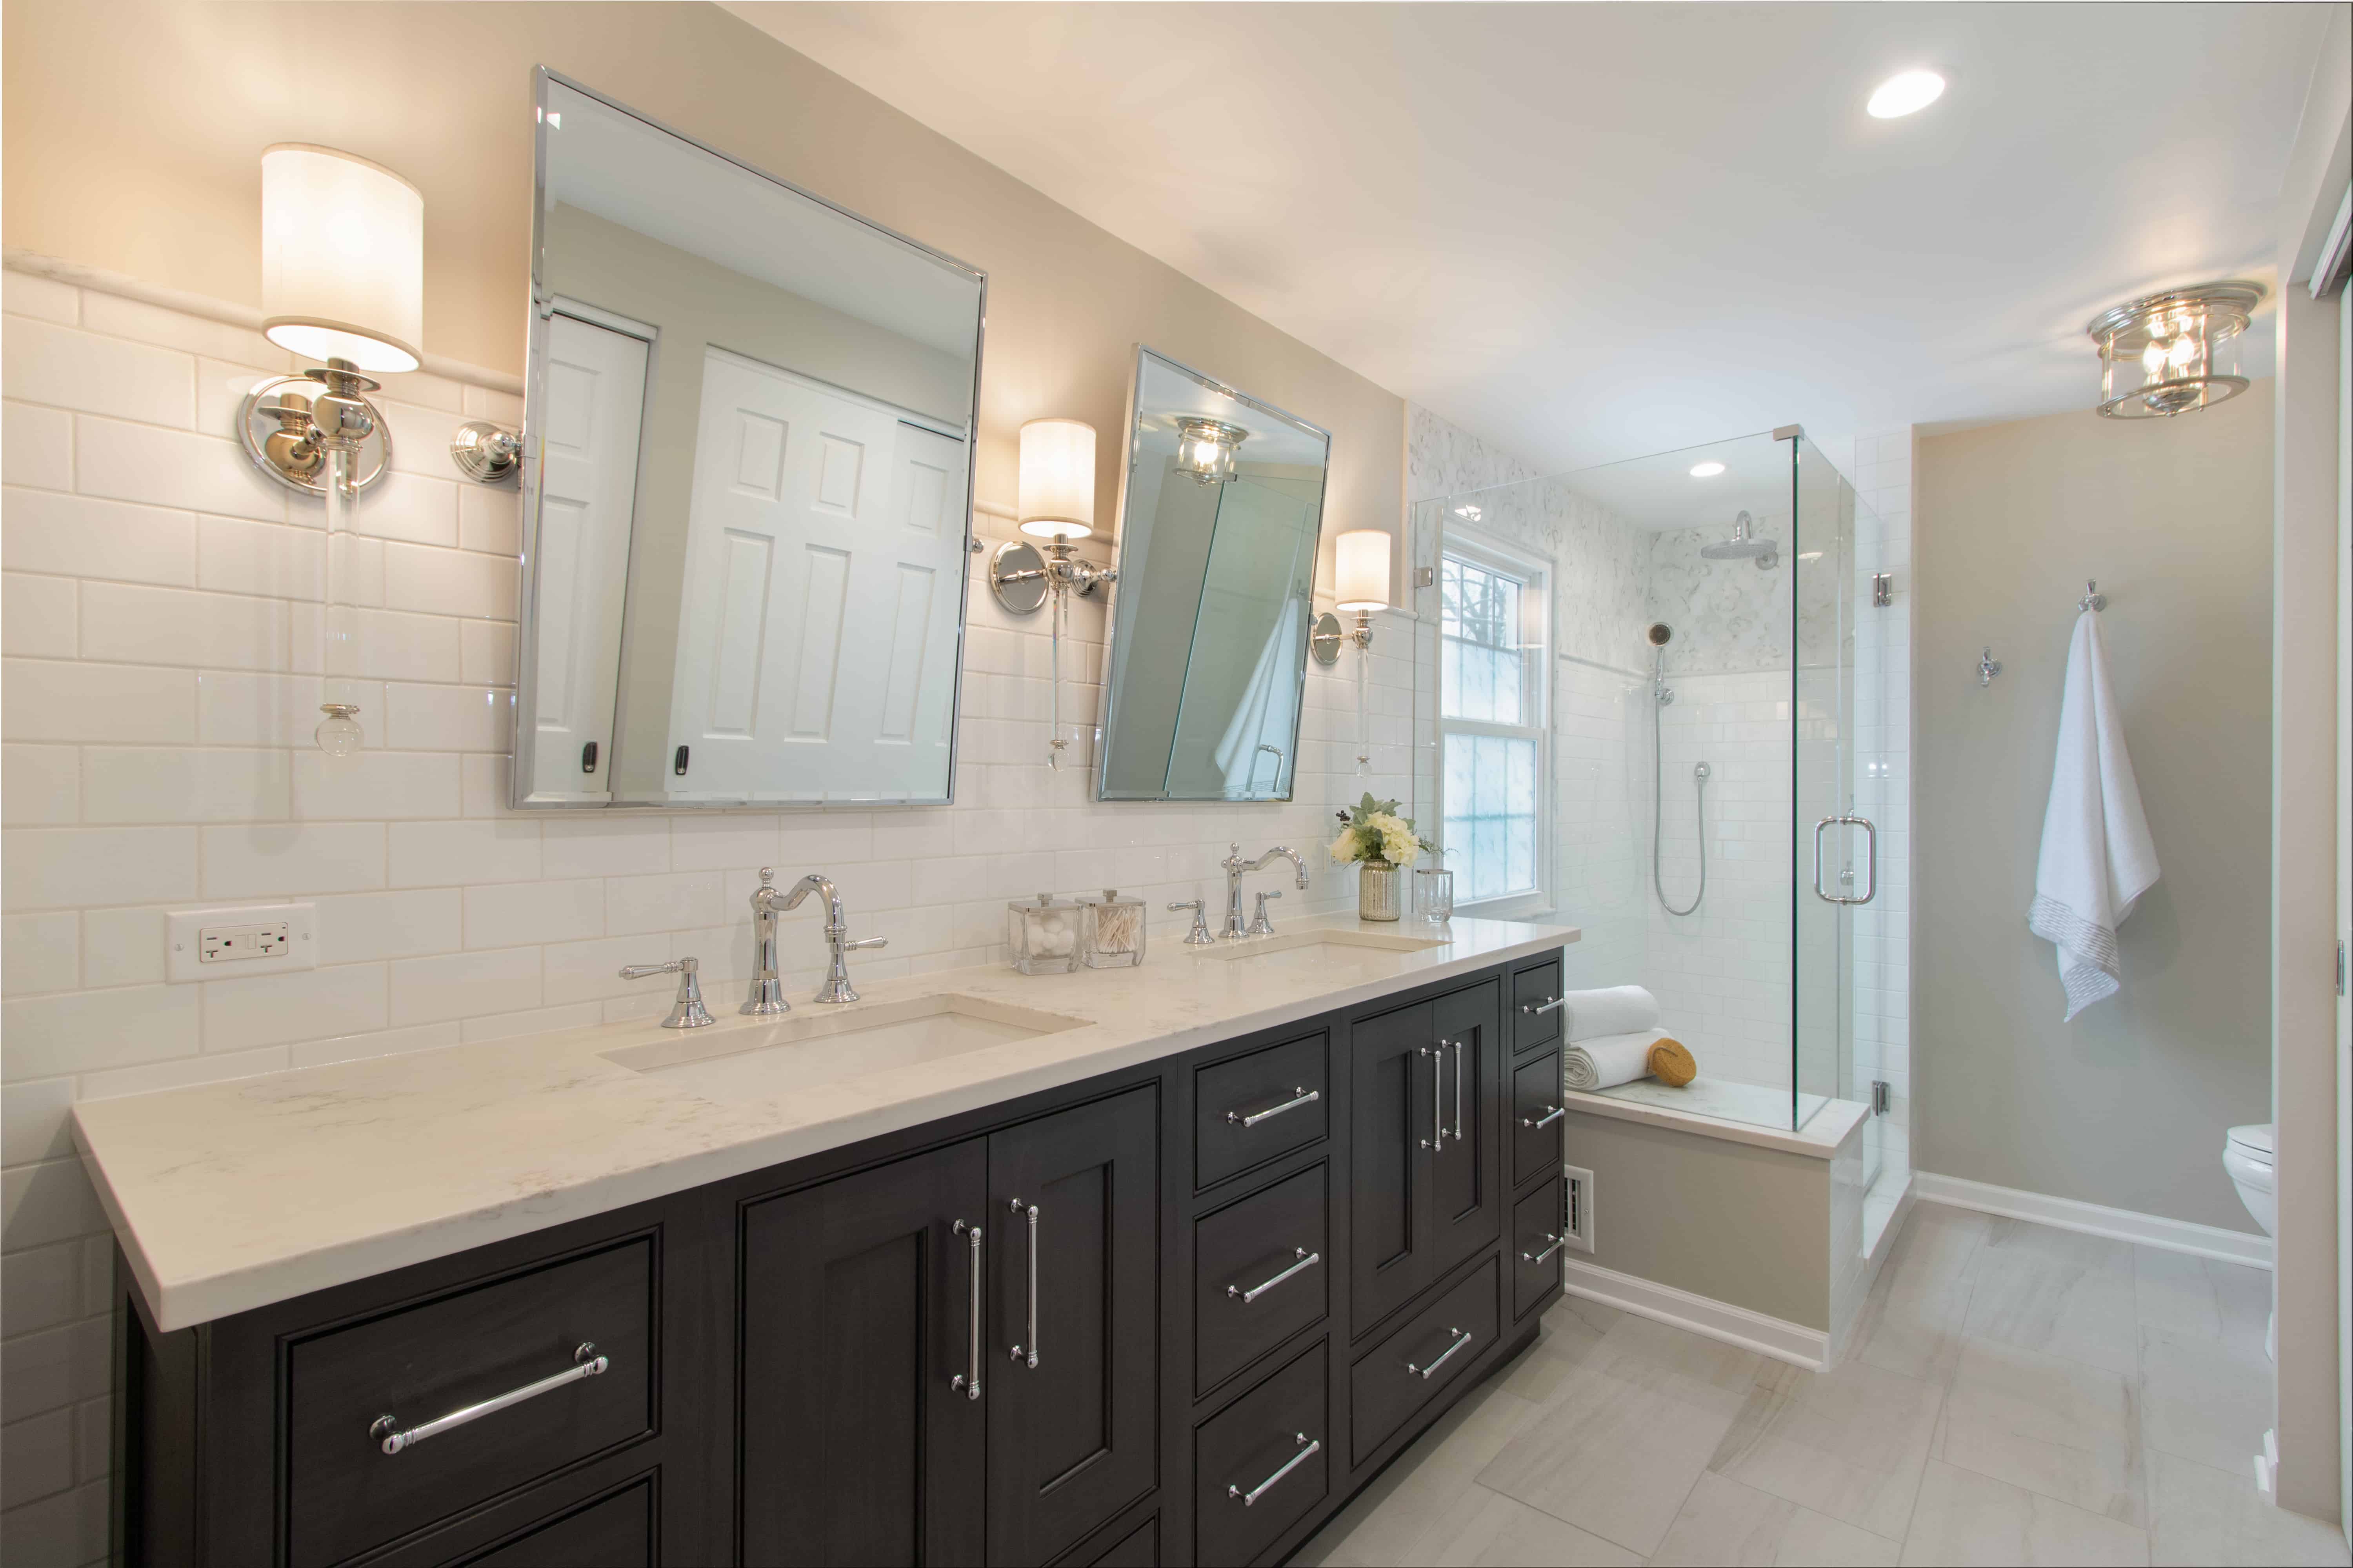 Bathroom Remodeling Project located in Palatine, Illinois